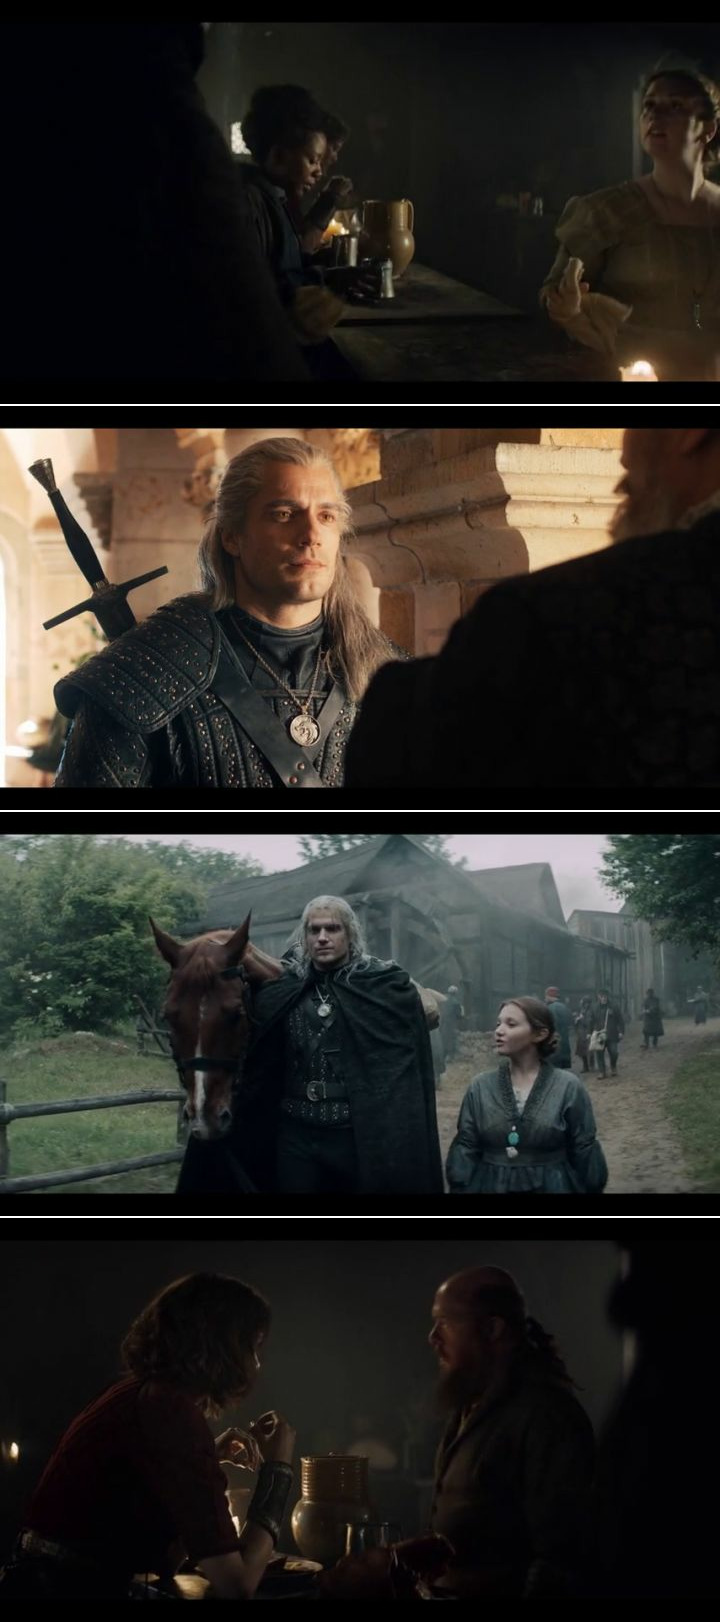 The.Witcher.S01.720p.x265-ZMNT